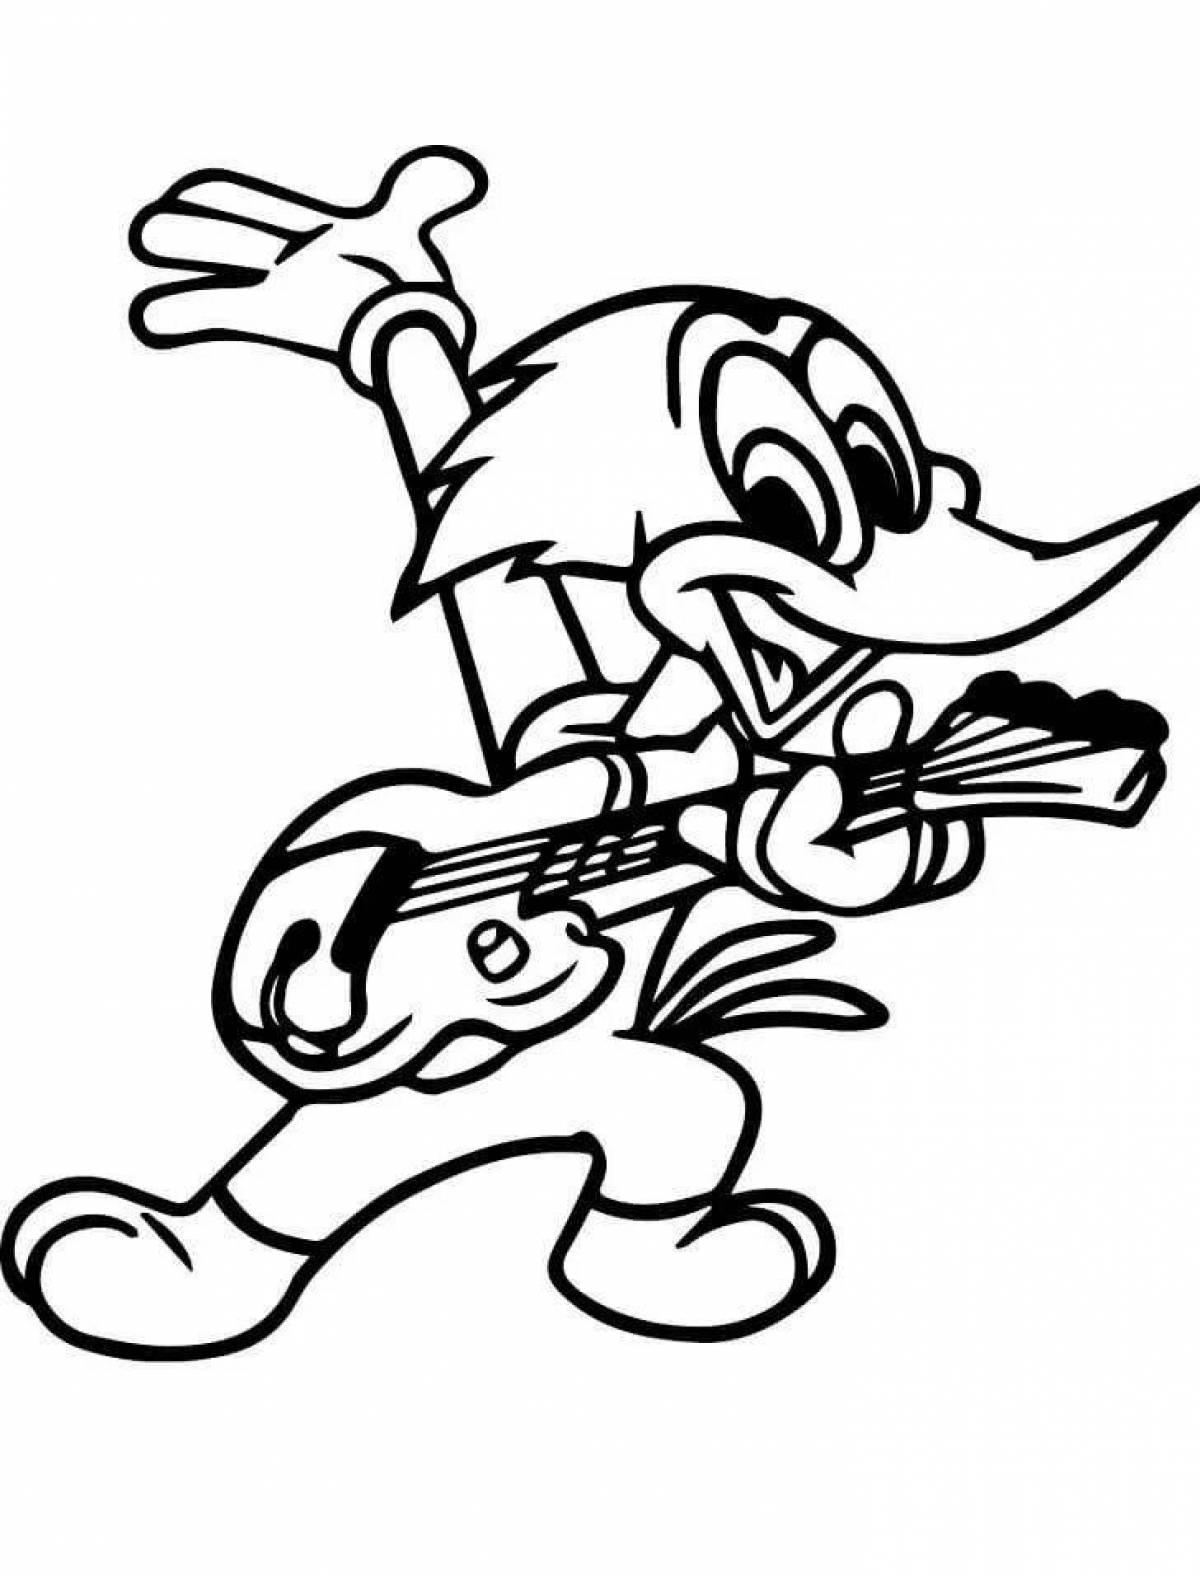 Colorful woody woodpecker coloring page